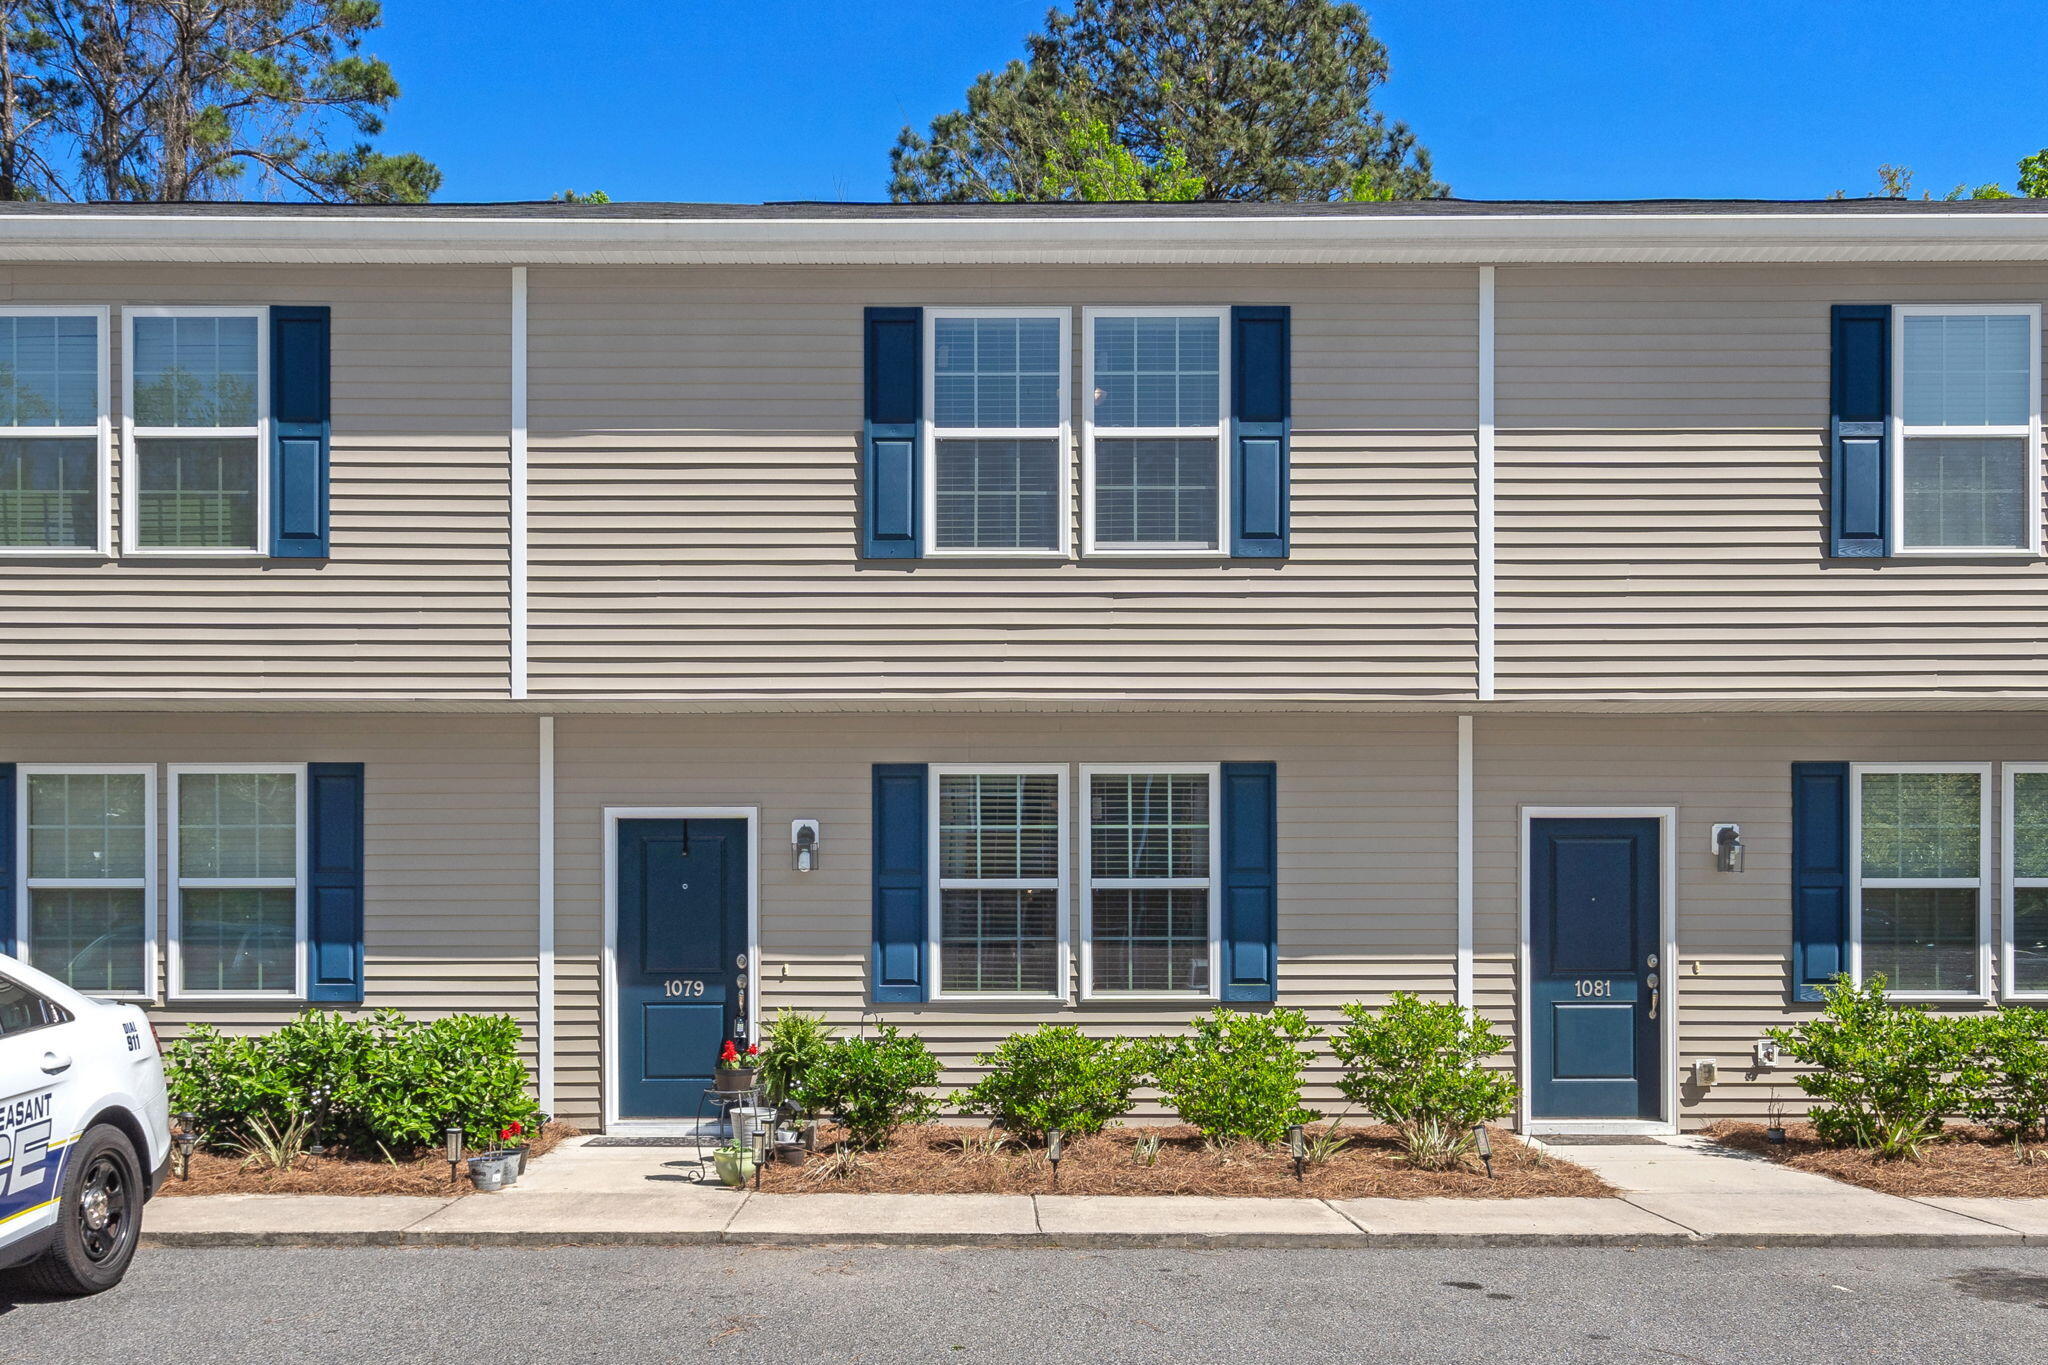 View Ladson, SC 29456 townhome